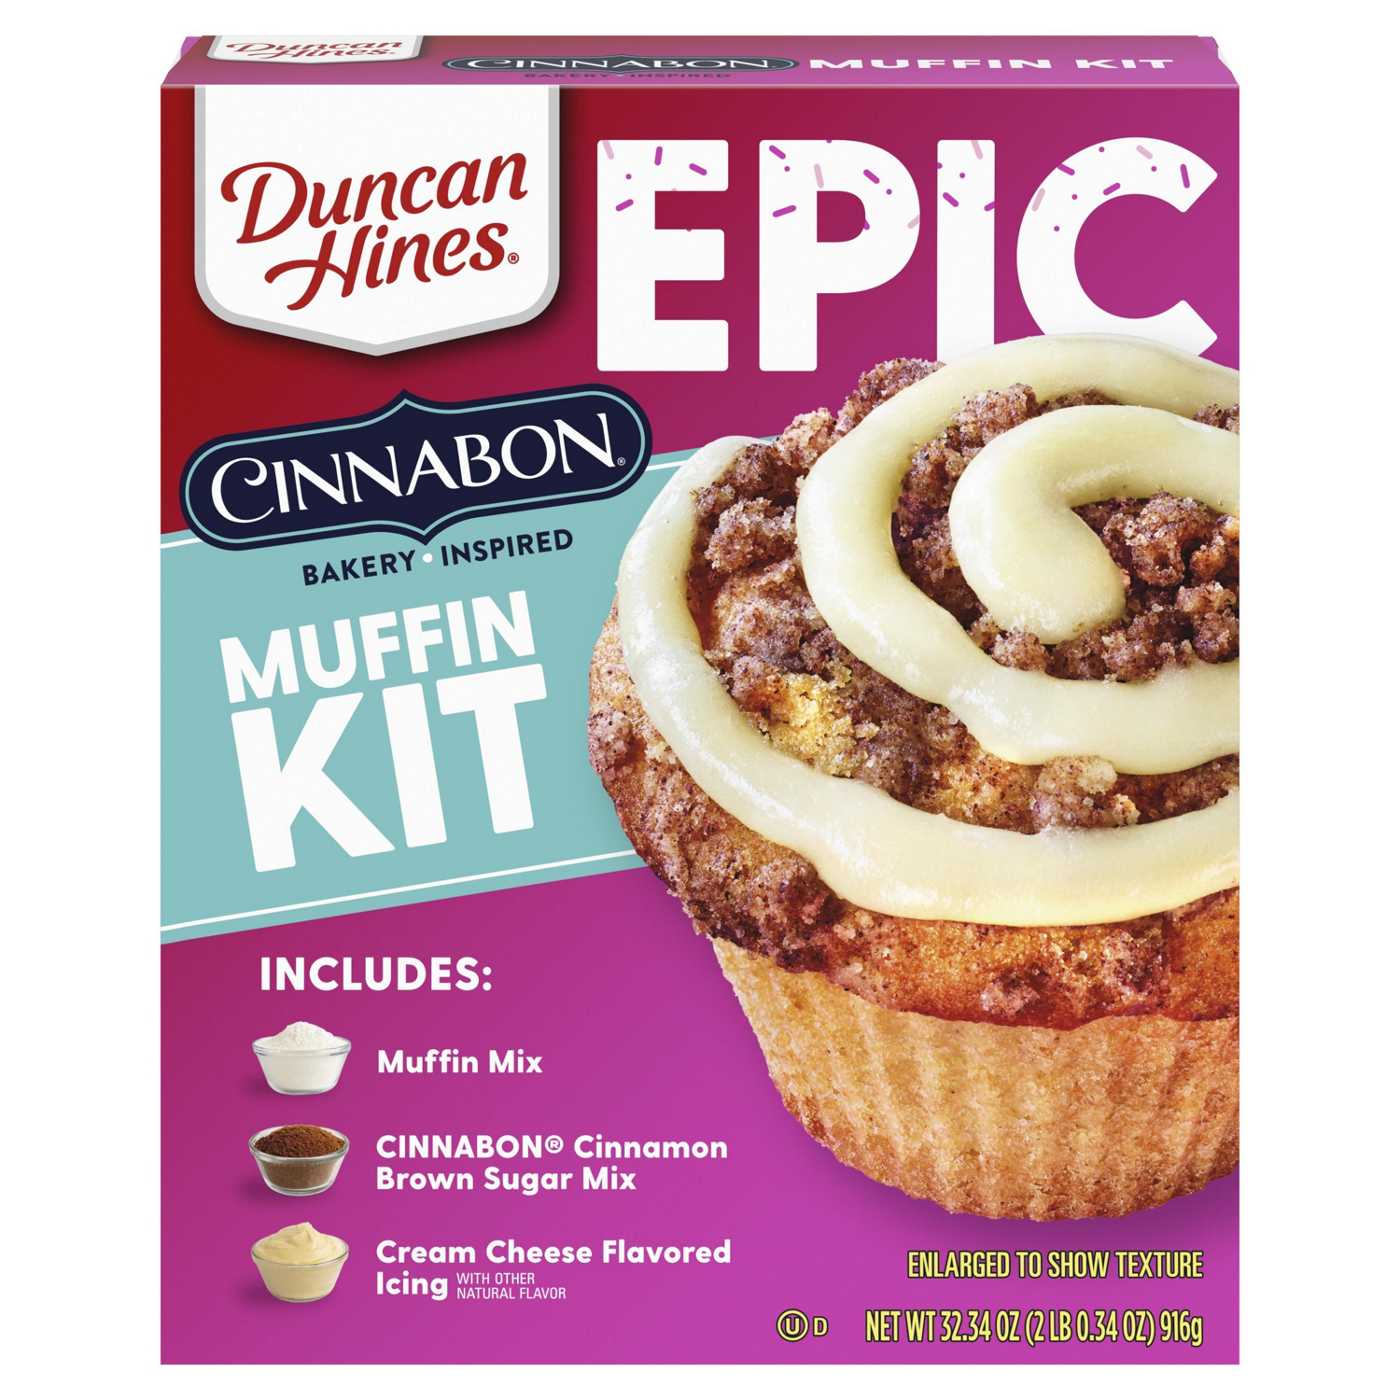 Duncan Hines Epic Cinnabon Bakery Inspired Muffin Kit; image 1 of 5